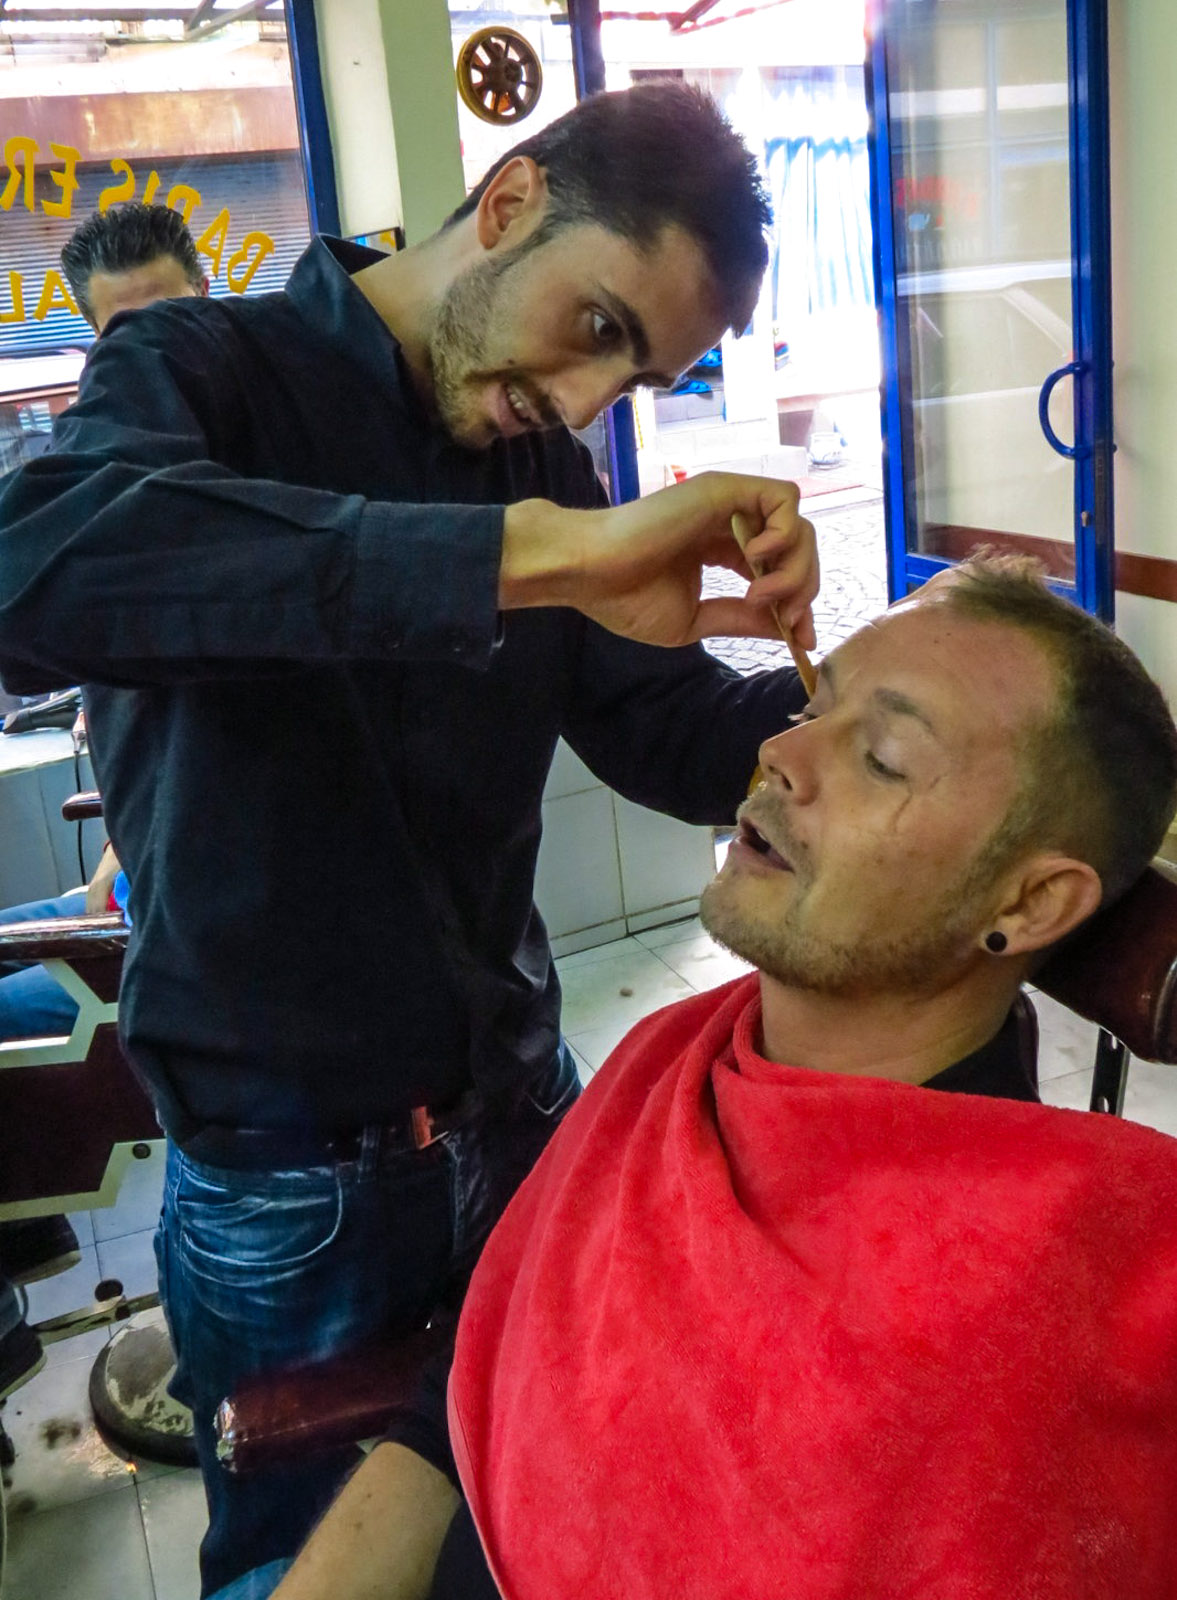 Male Pampering Getting A Shave In Turkey Flashpacking Travel Blog